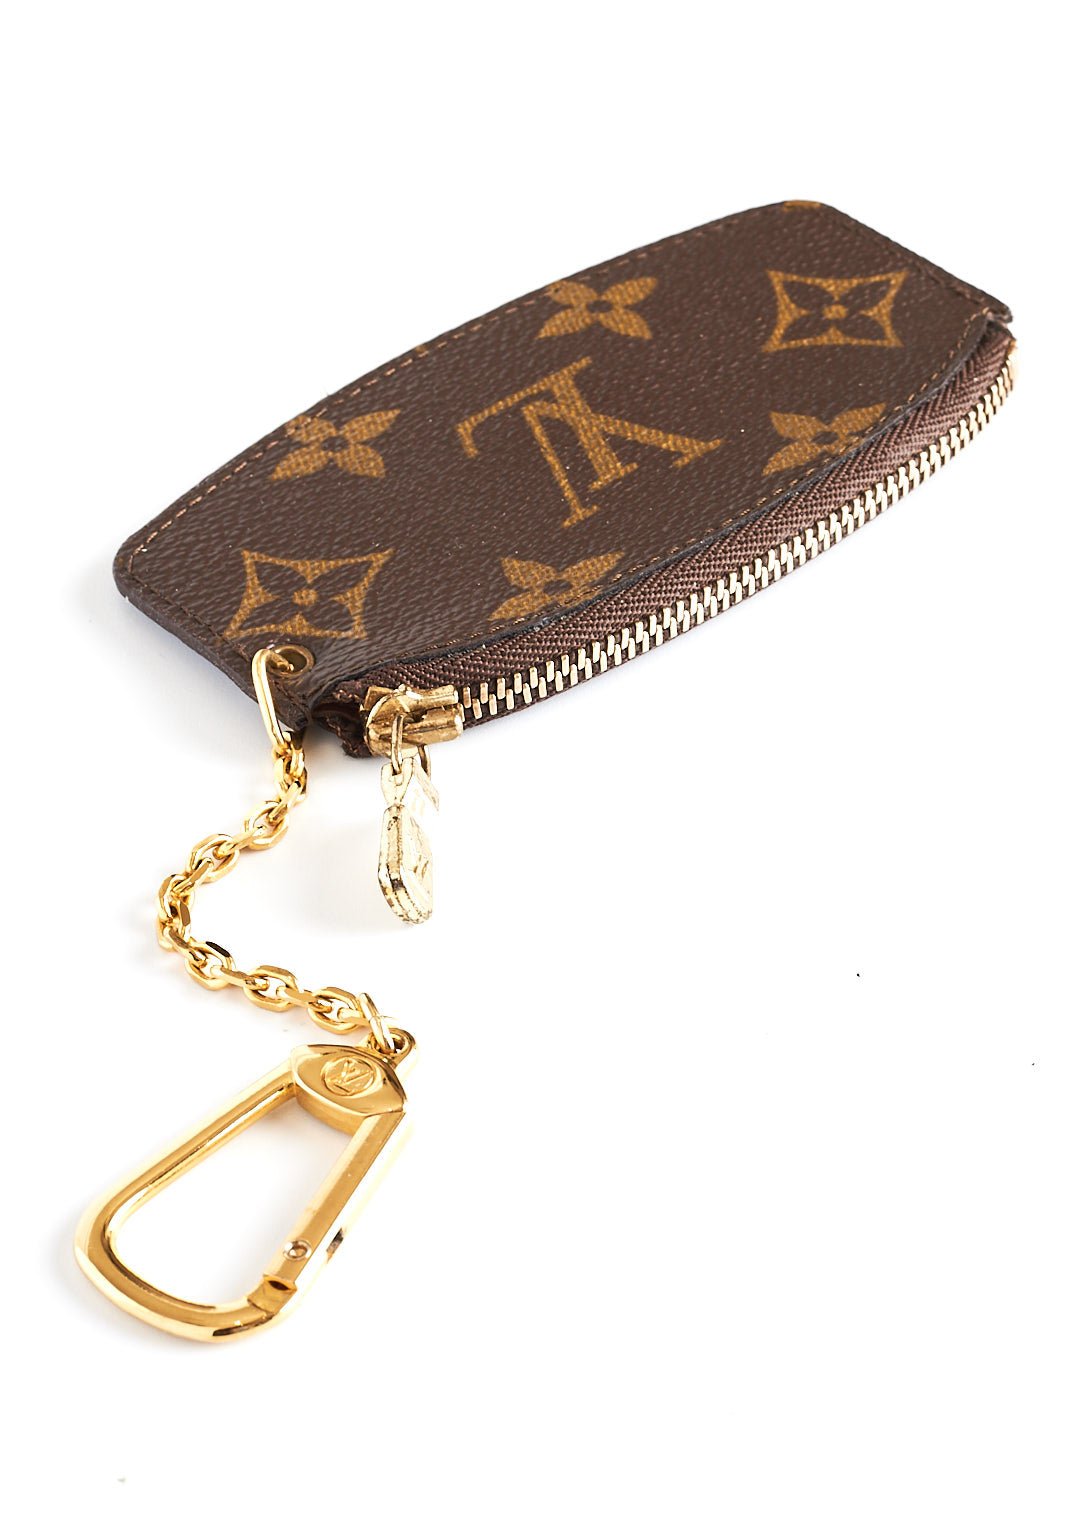 Louis Vuitton key pouch- Quality issues? Made in France VS USA